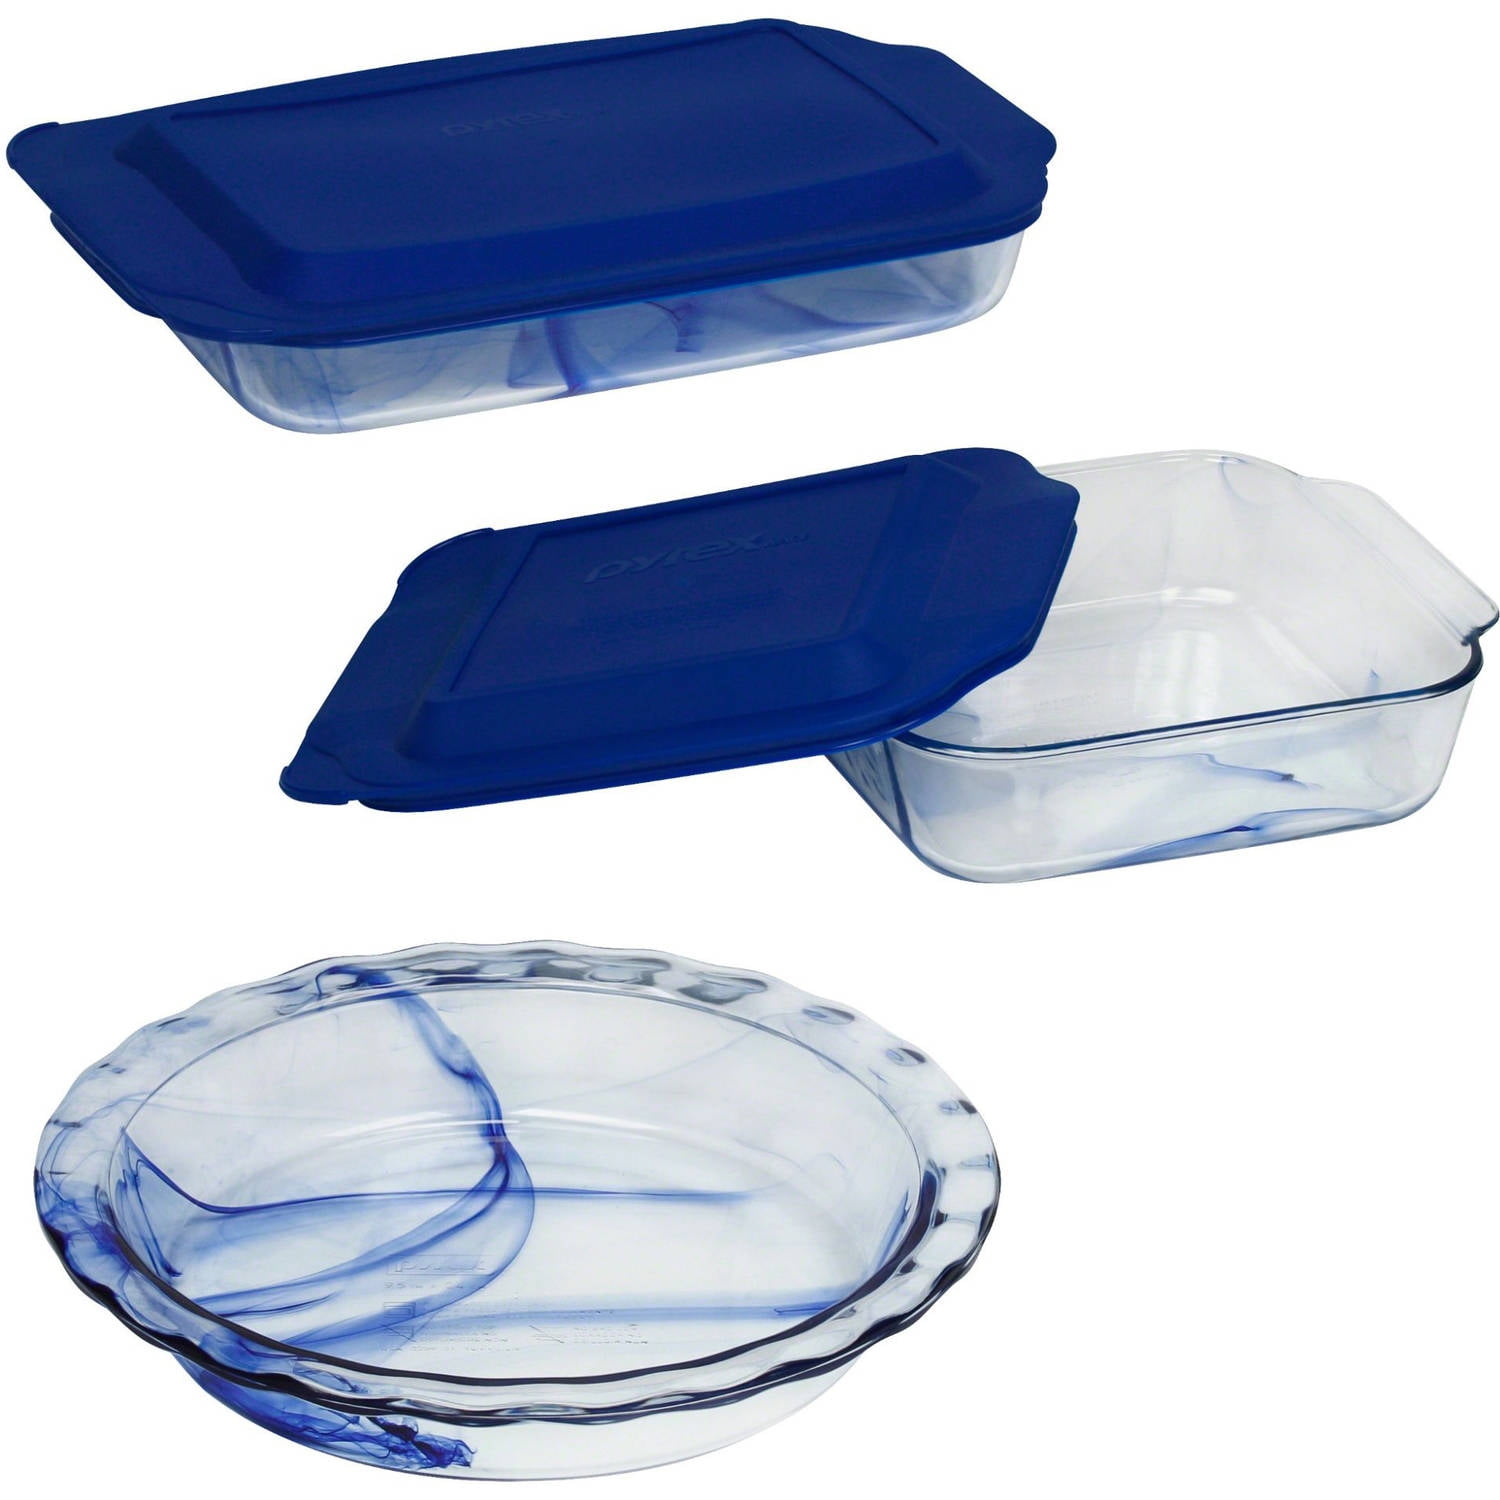 Blue Plastic Lid for Watercolor Collection 8 Square Baking Dish